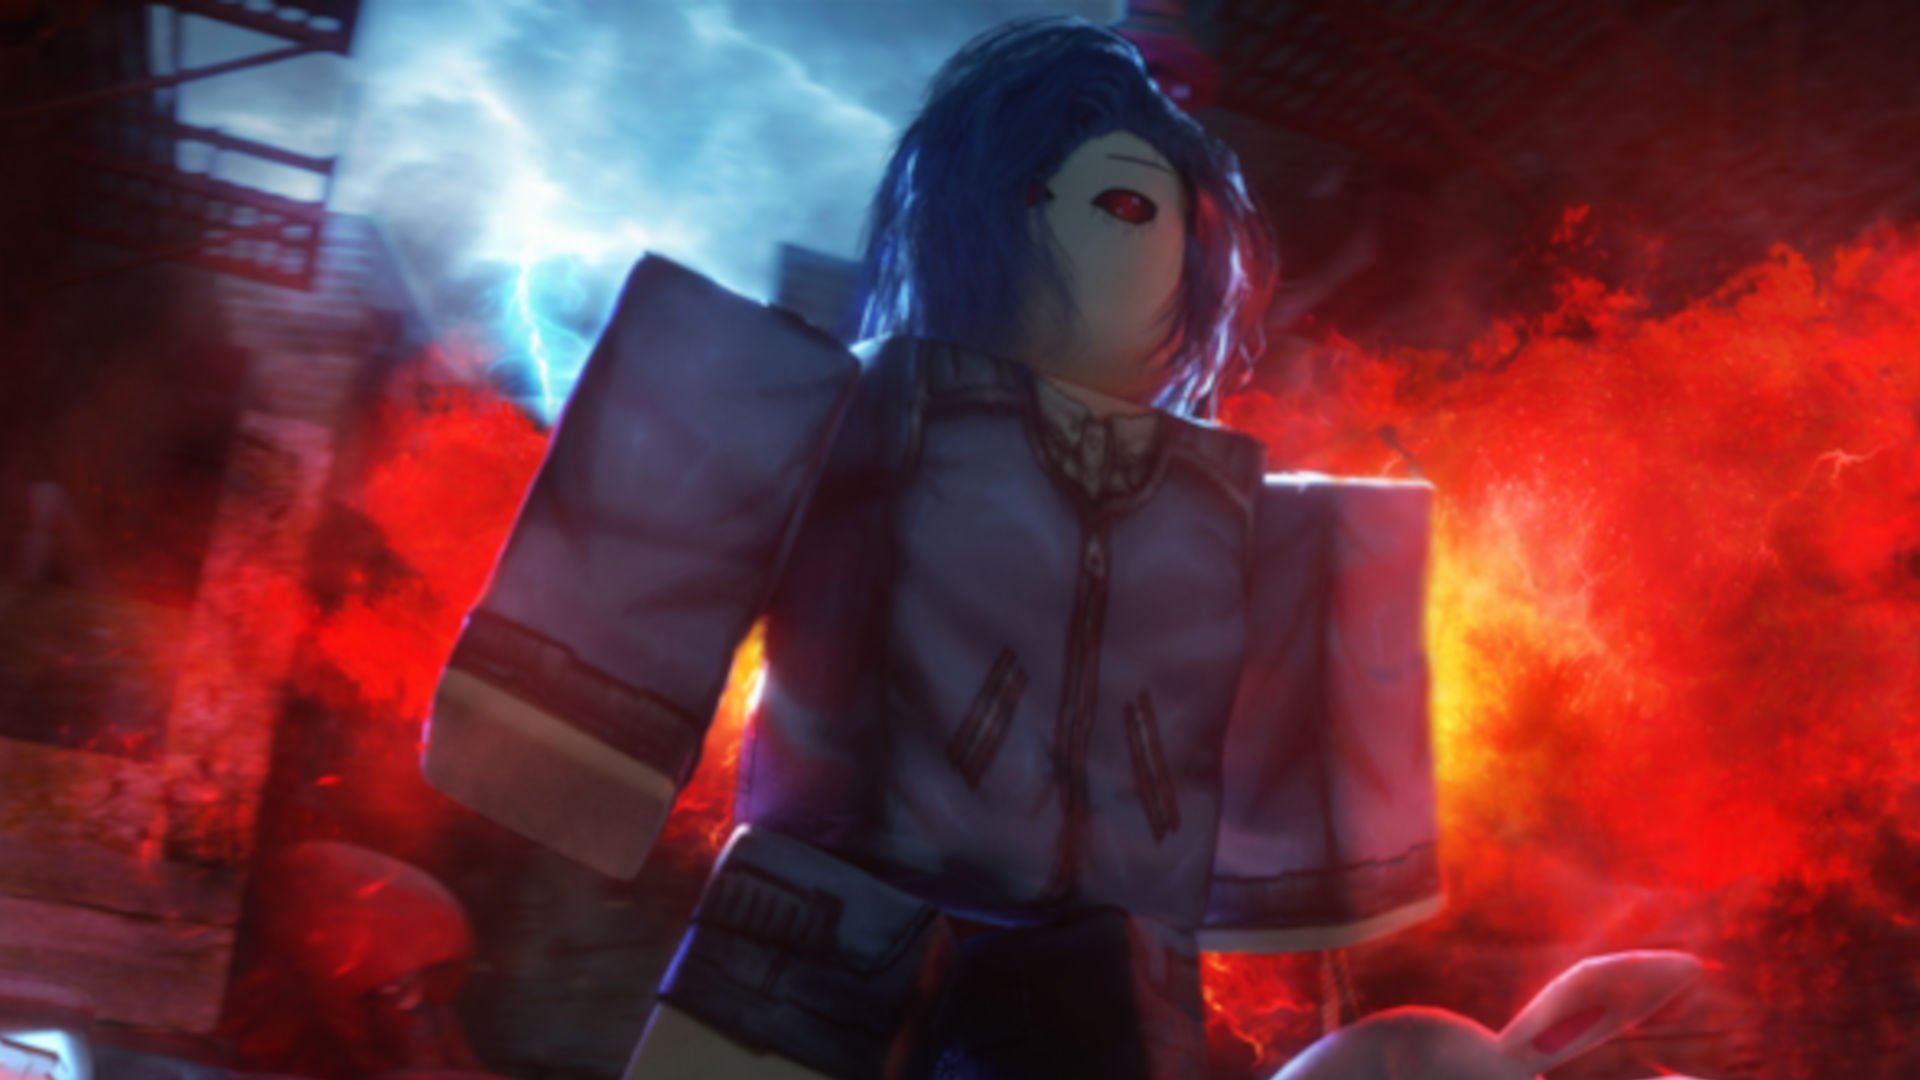 Ro-Ghoul Alpha Codes: A menacing Roblox character with red eyes